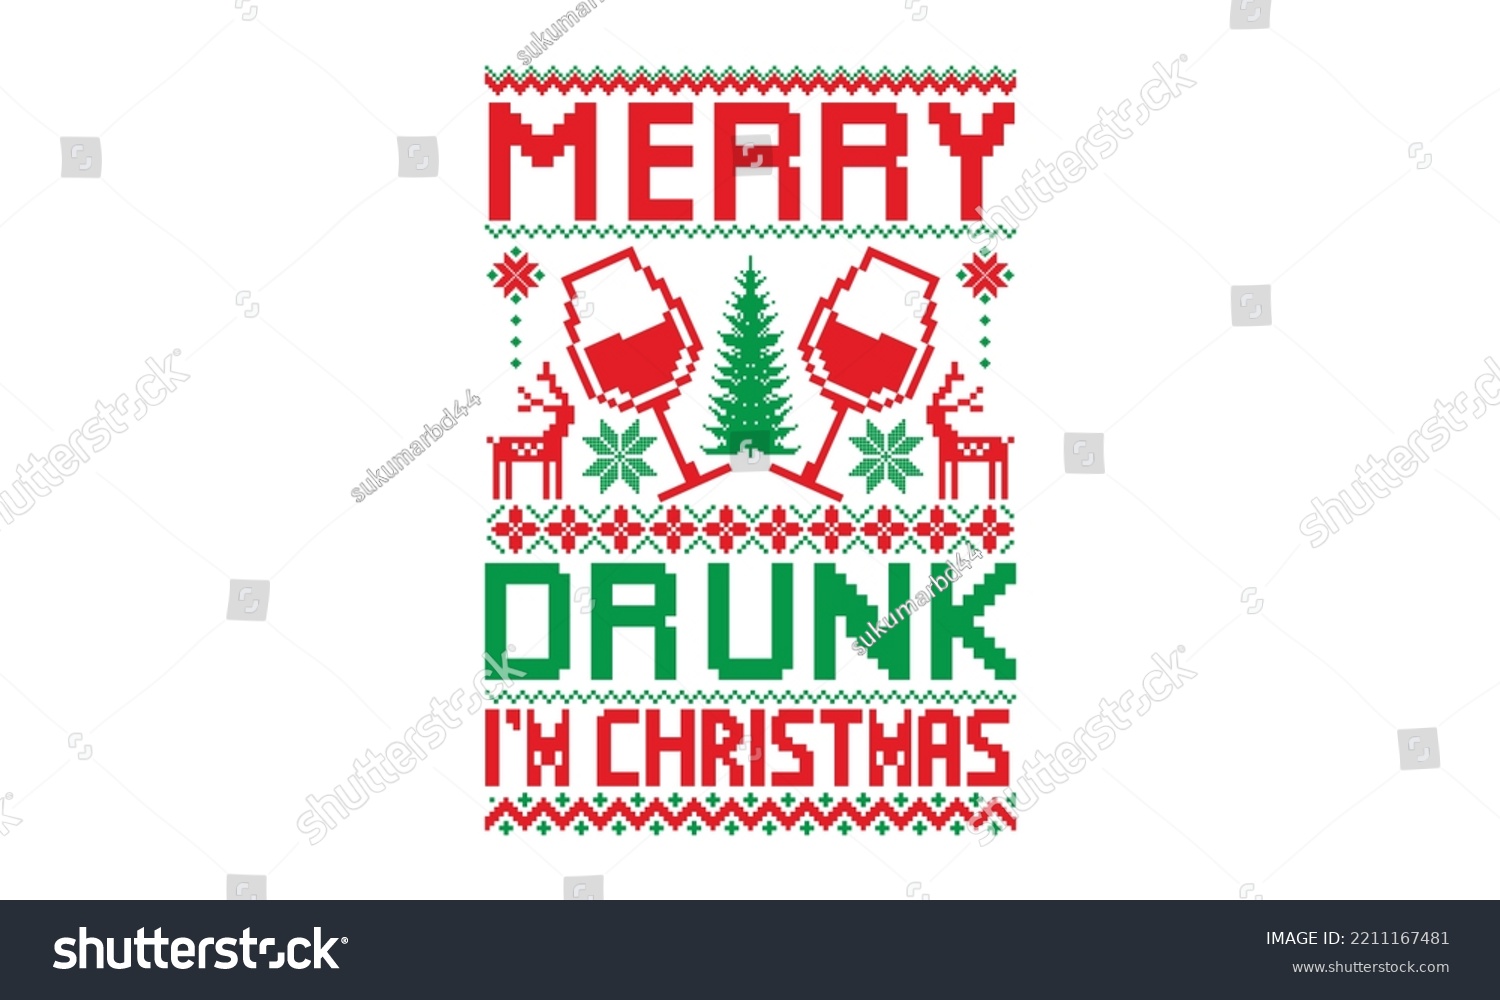 SVG of Merry drunk I’m Christmas - Ugly Christmas Sweater T-shirt Design, Handmade calligraphy vector illustration, eps, svg Files for Cutting svg